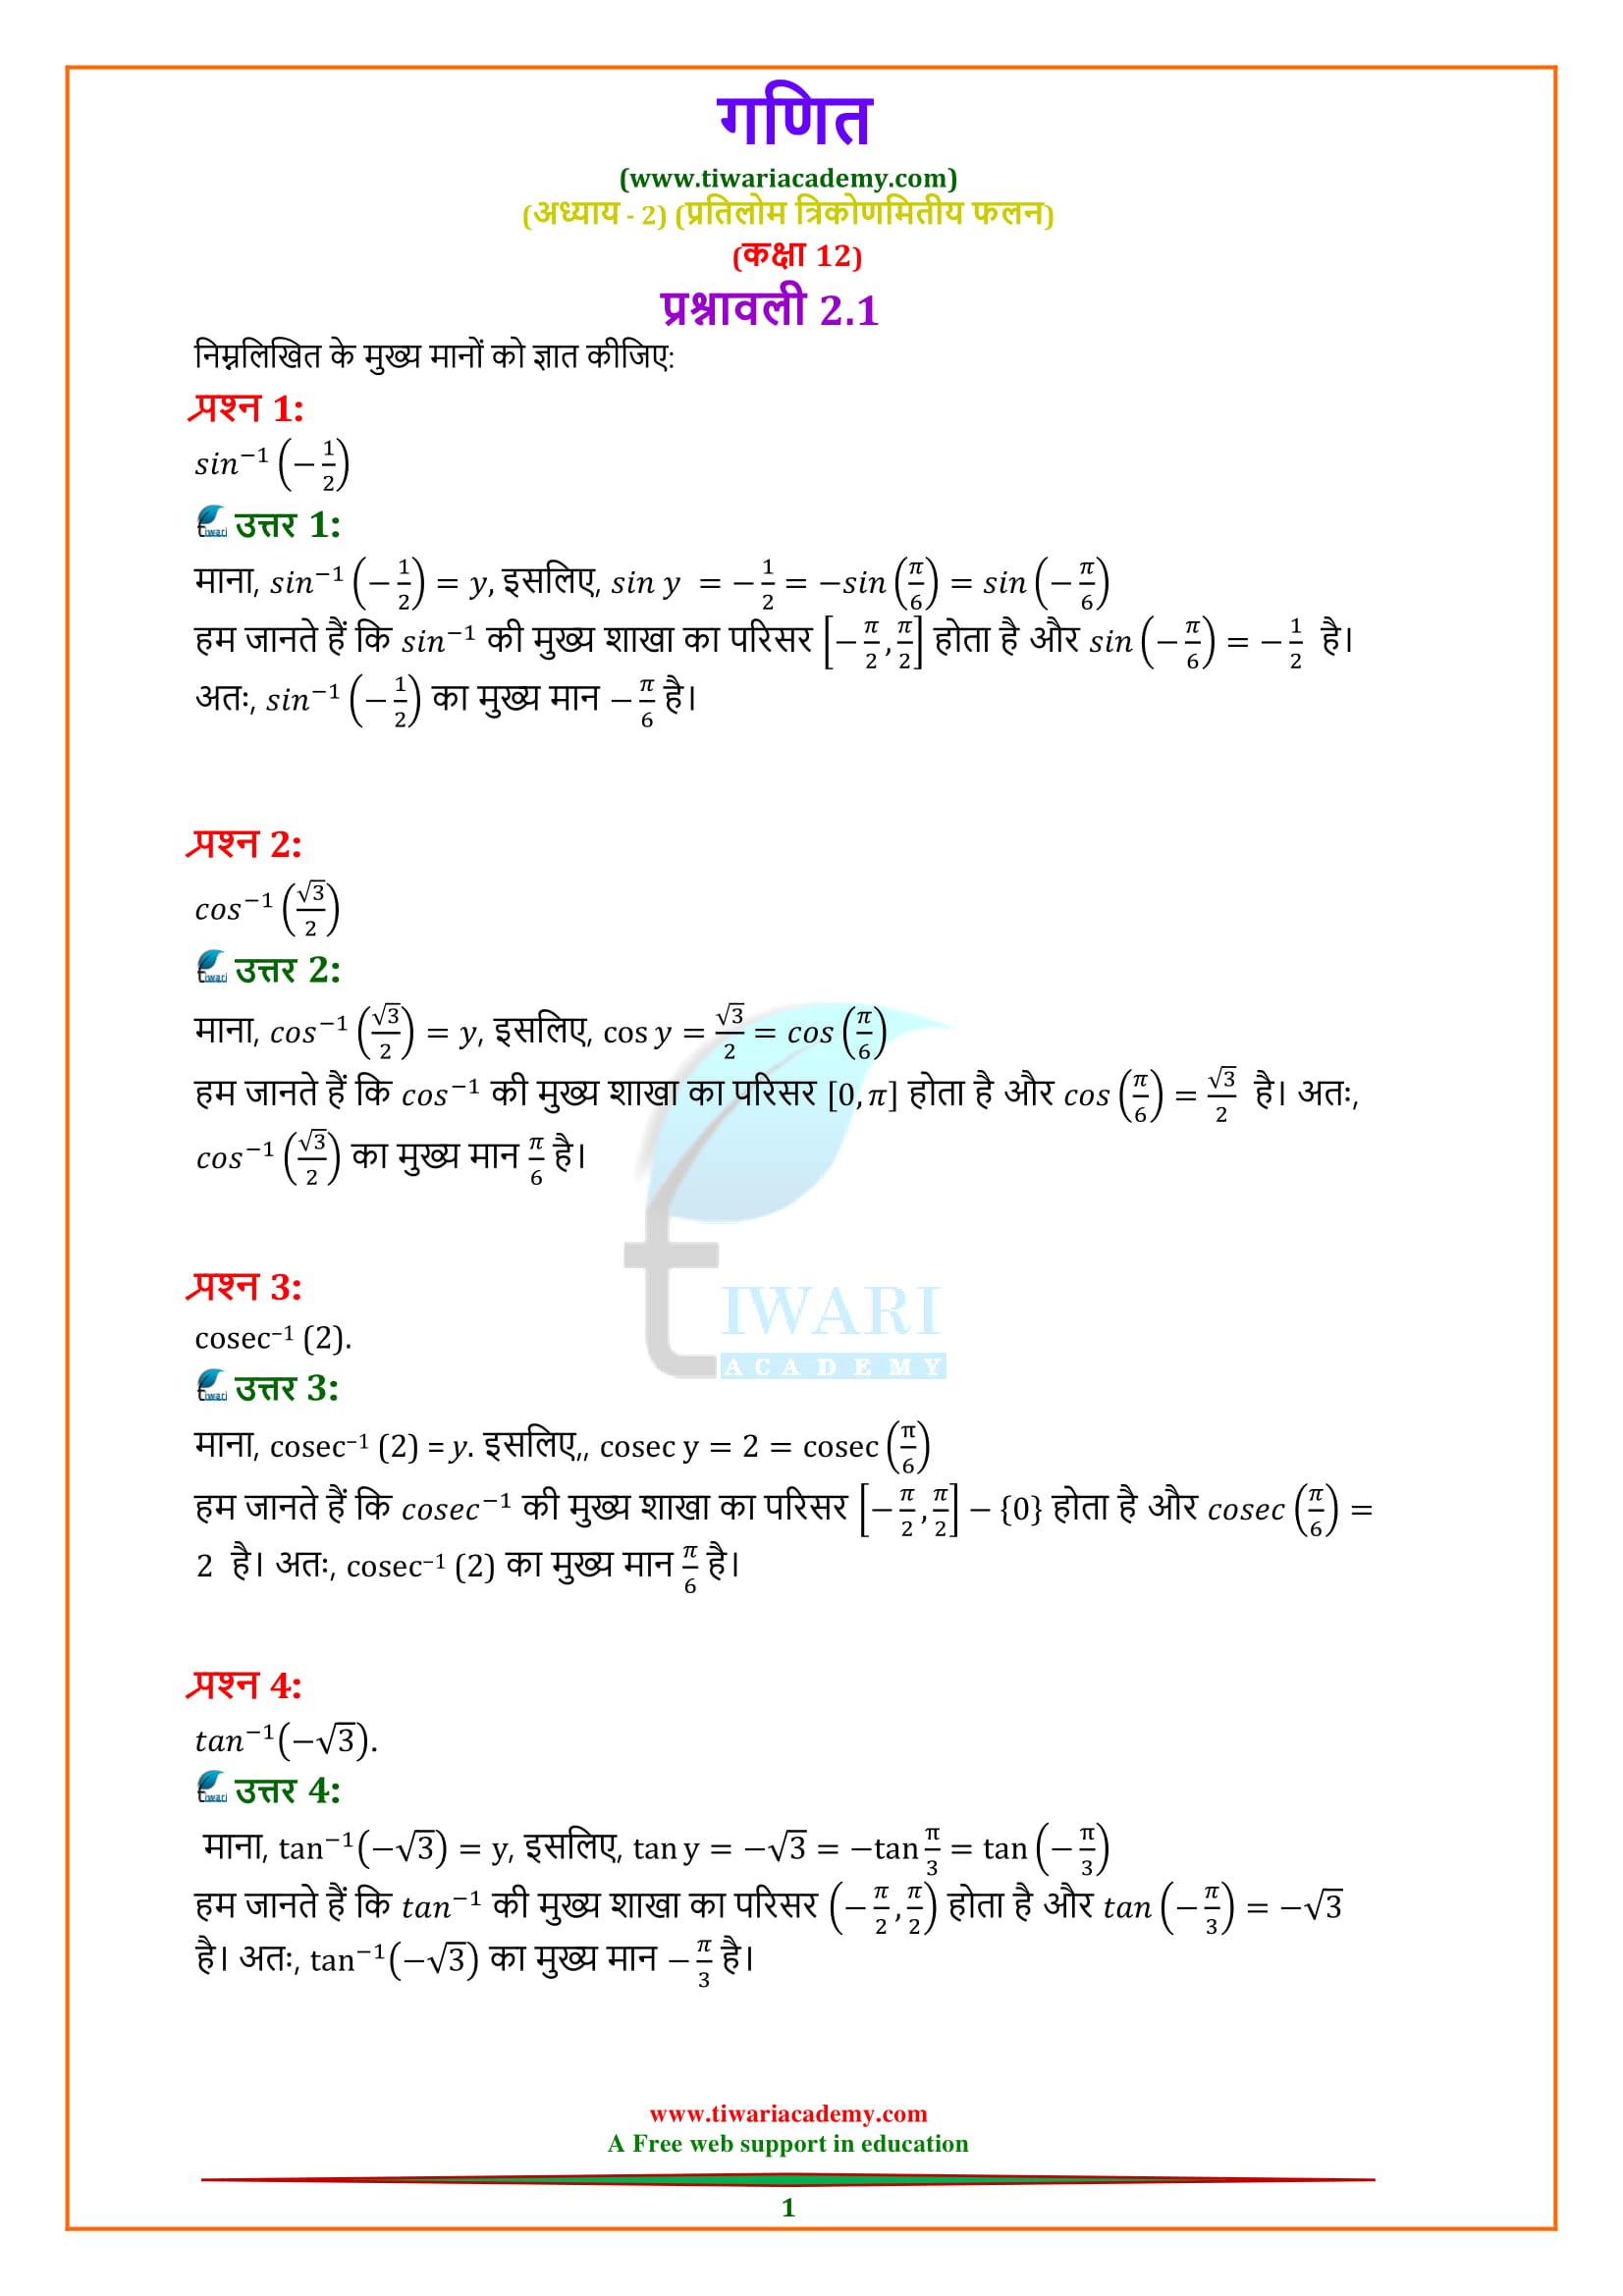 12 Maths Chapter 2 Exercise 2.1 Solutions in Hindi medium